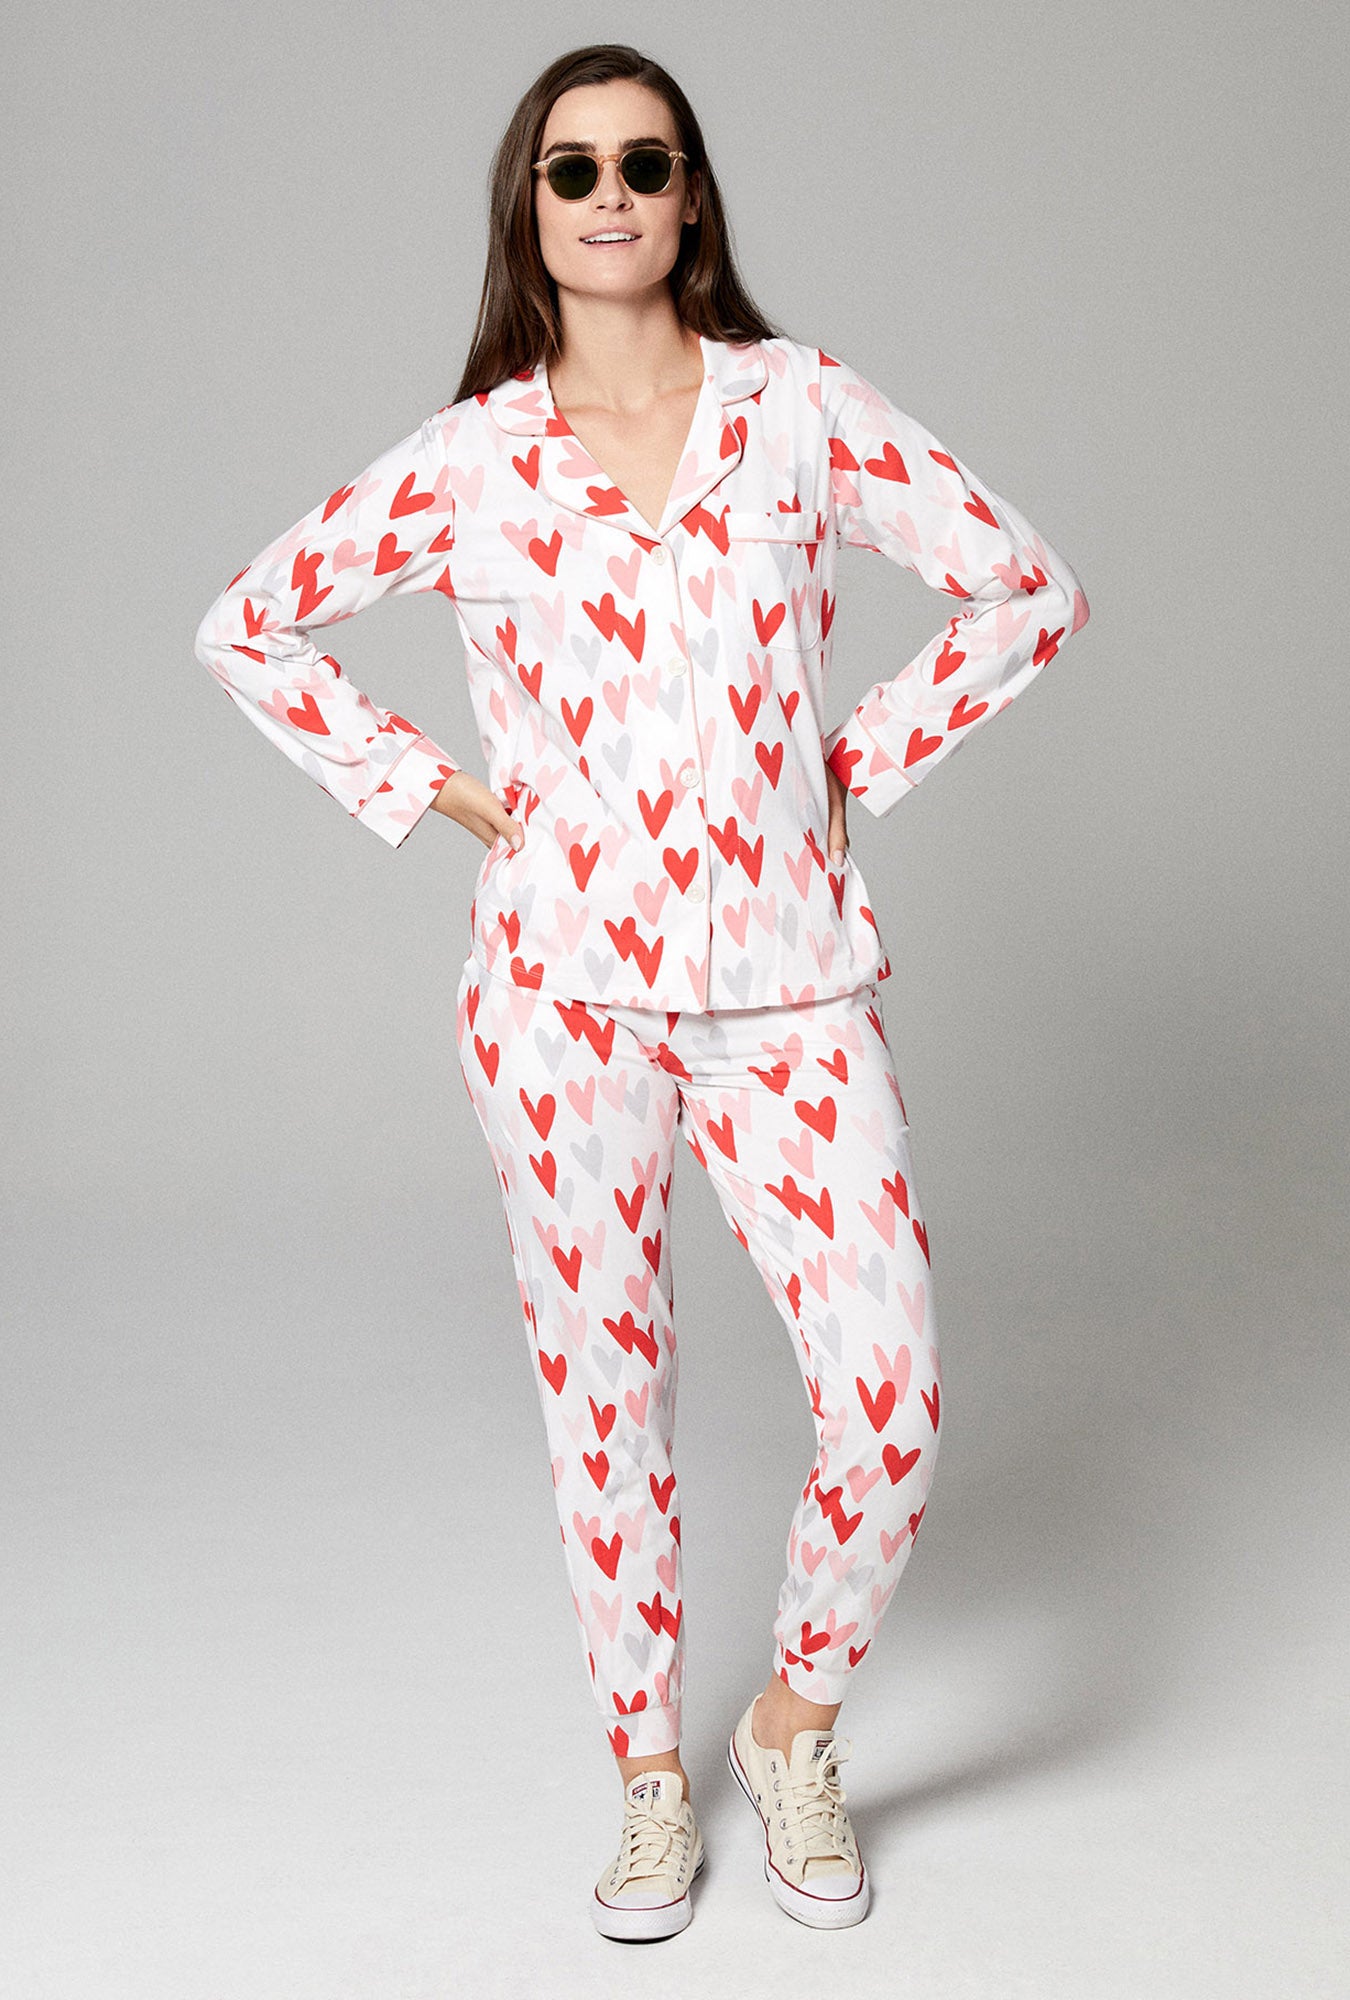 Love is all you need - Bedhead Pajamas